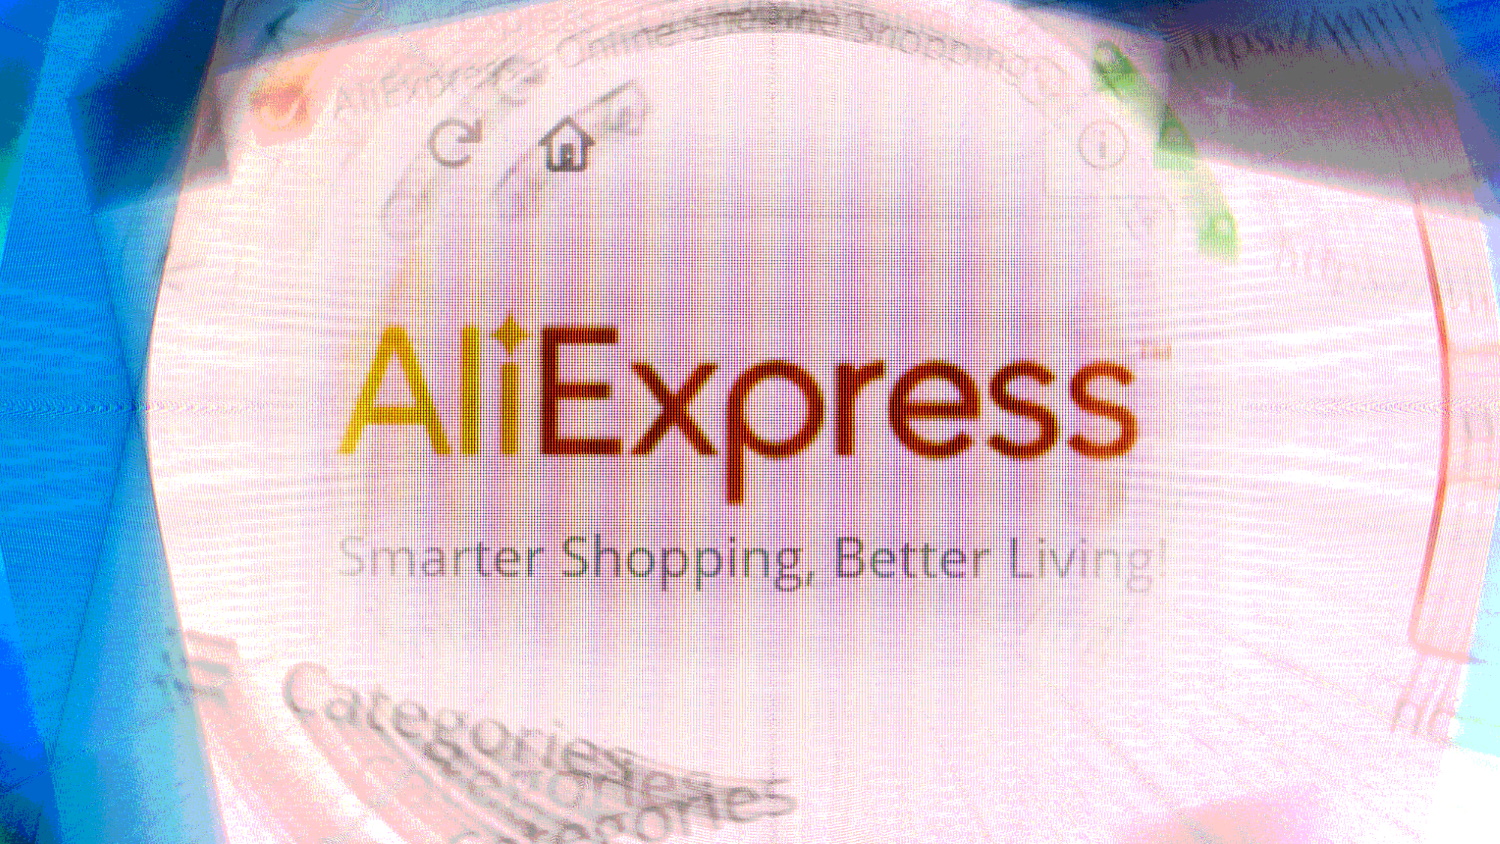 Email Aliexpress